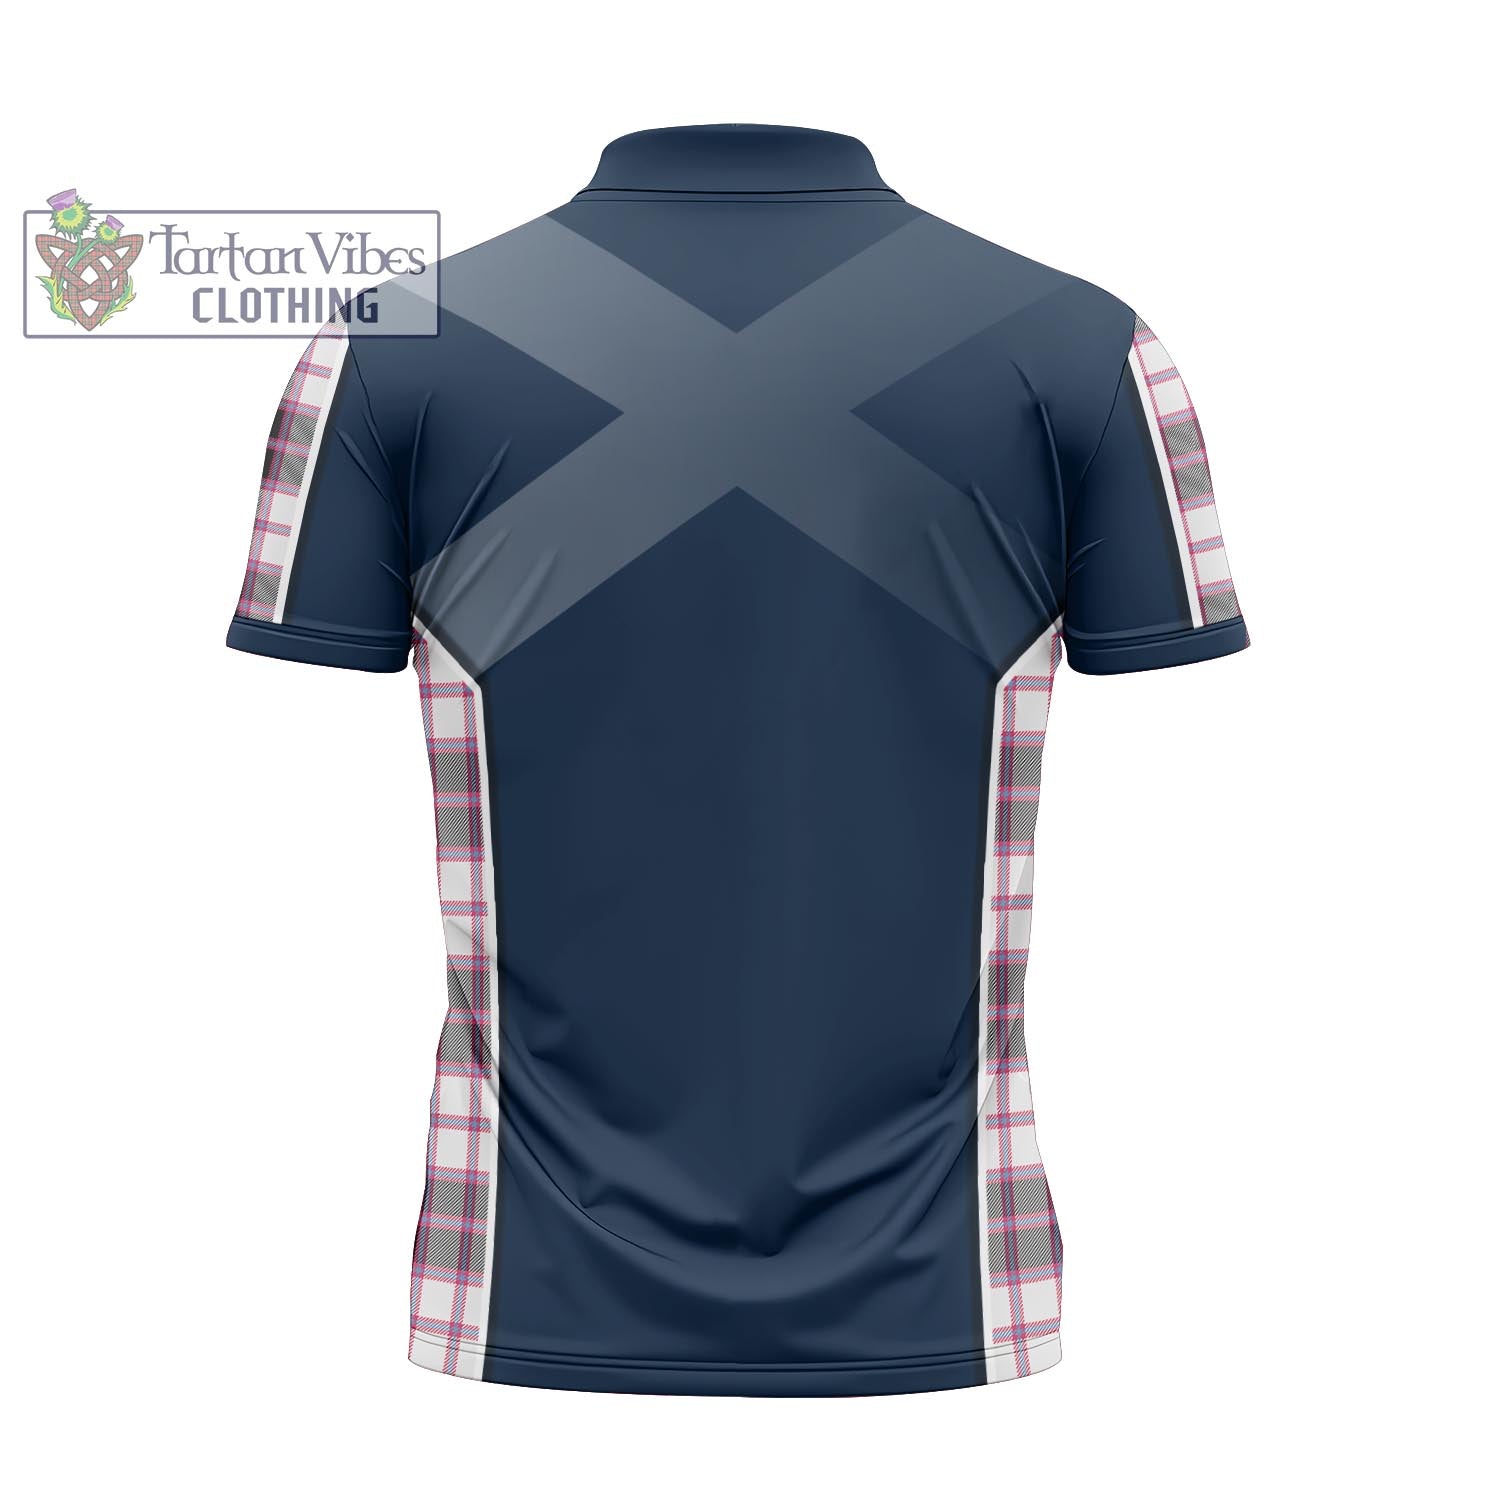 Tartan Vibes Clothing MacPherson Hunting Modern Tartan Zipper Polo Shirt with Family Crest and Scottish Thistle Vibes Sport Style